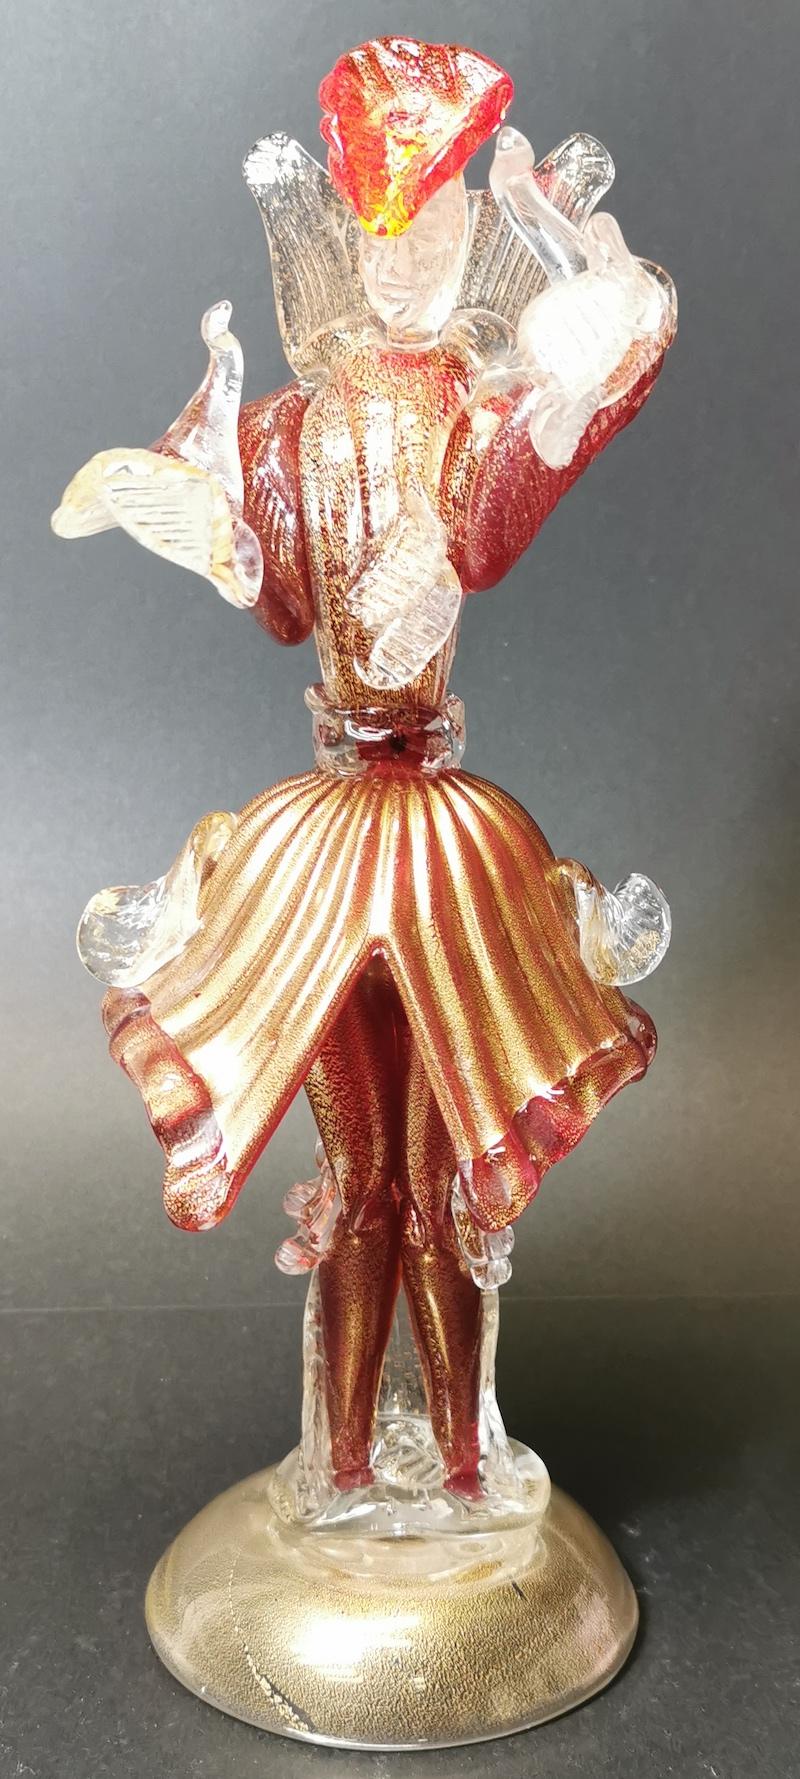 Mid-Century Modern Italian blown glass sculpture figurine by Mario Badioli, 
etched signature Badioli Murano inside base, 
Our eclectic stock crosses cultures, continents, styles and famous names.